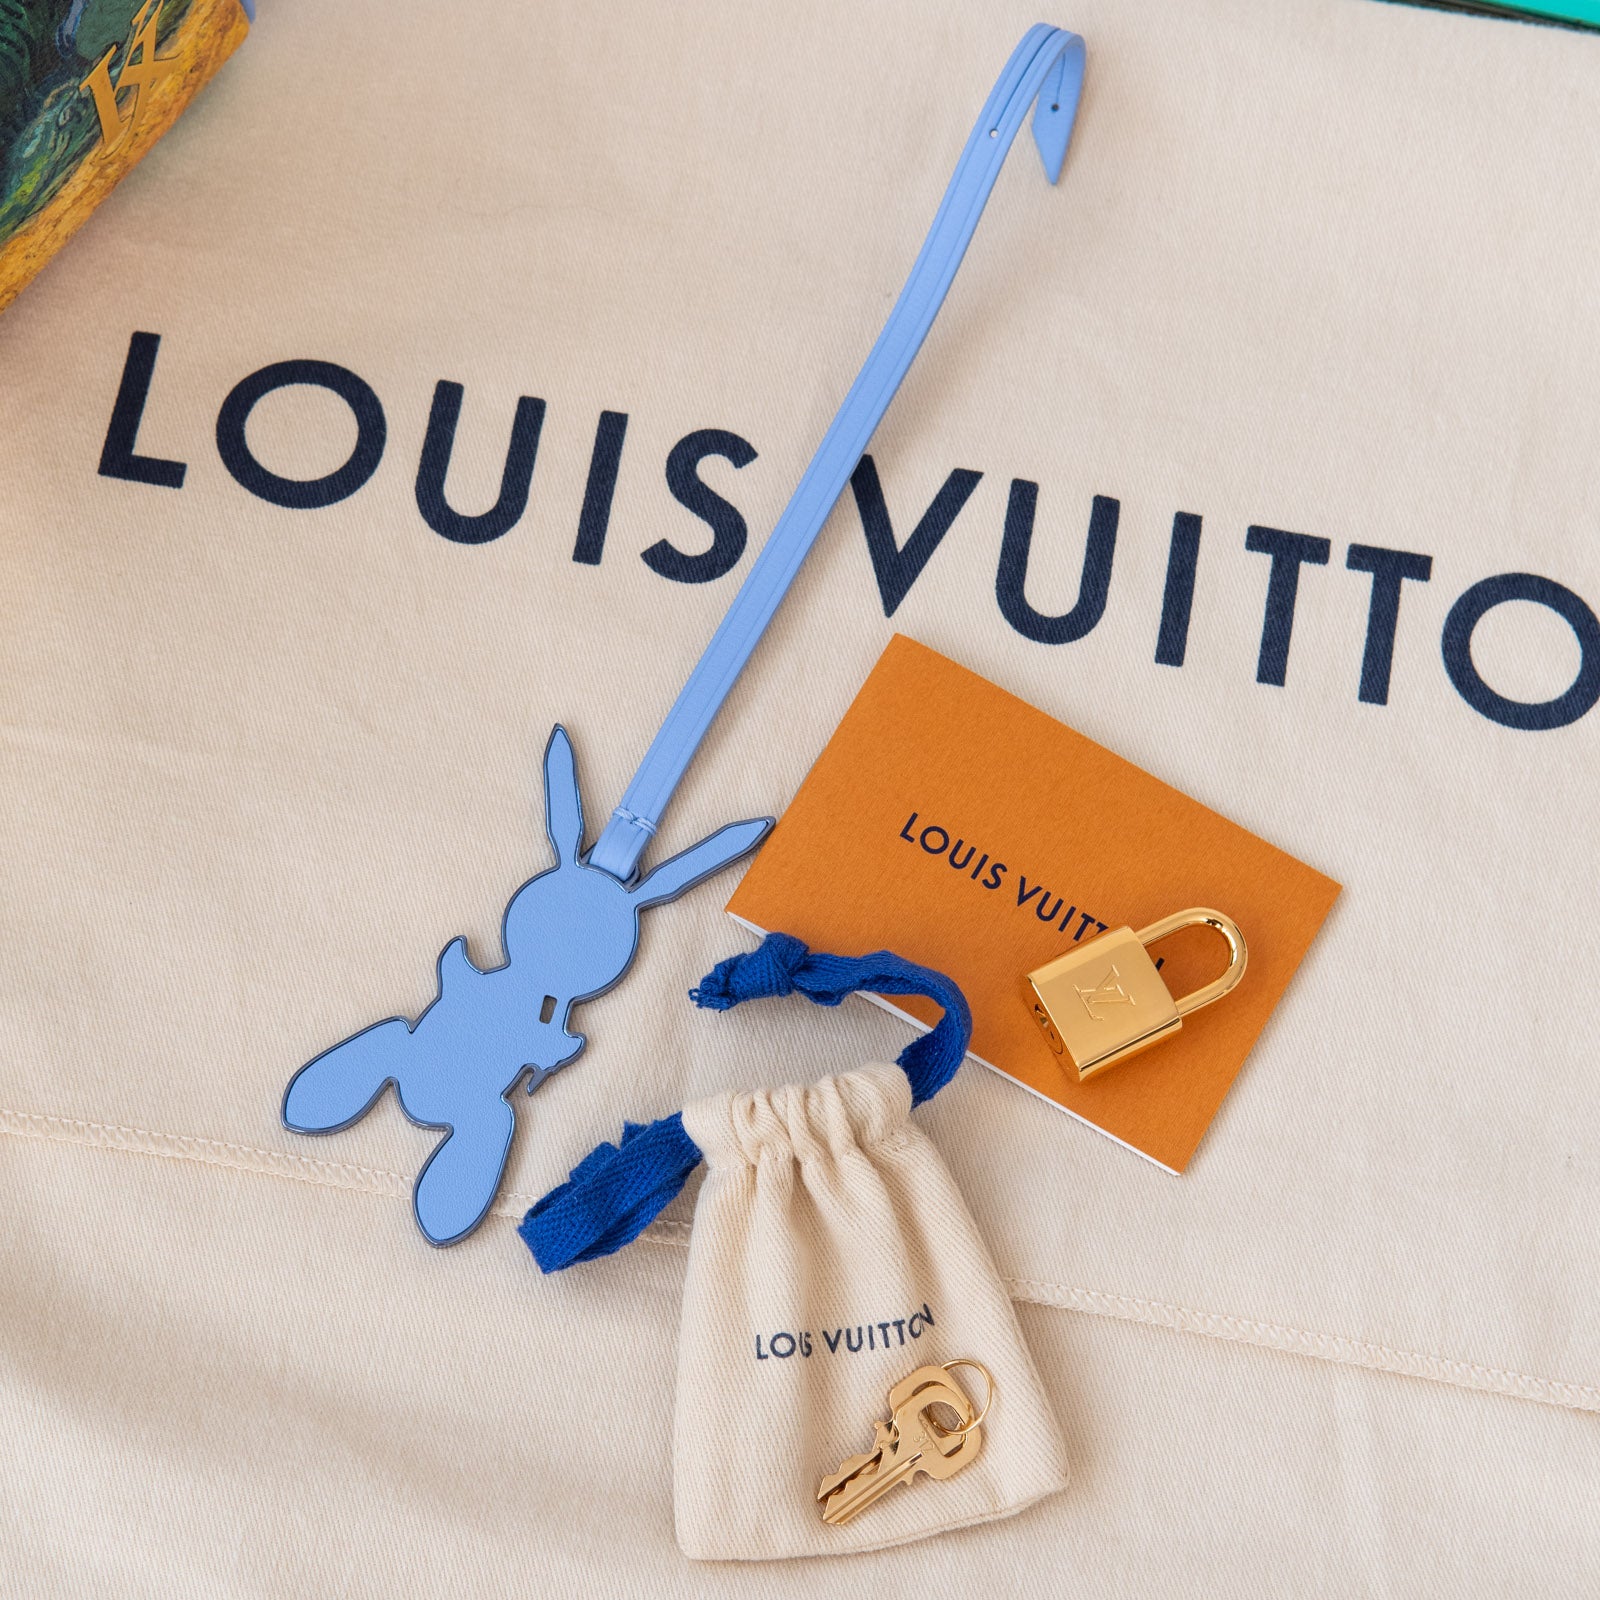 Louis Vuitton Limited Edition Lavender Speedy 30 Jeff Koons Van Gogh Masters Collection - Image 17 of 18